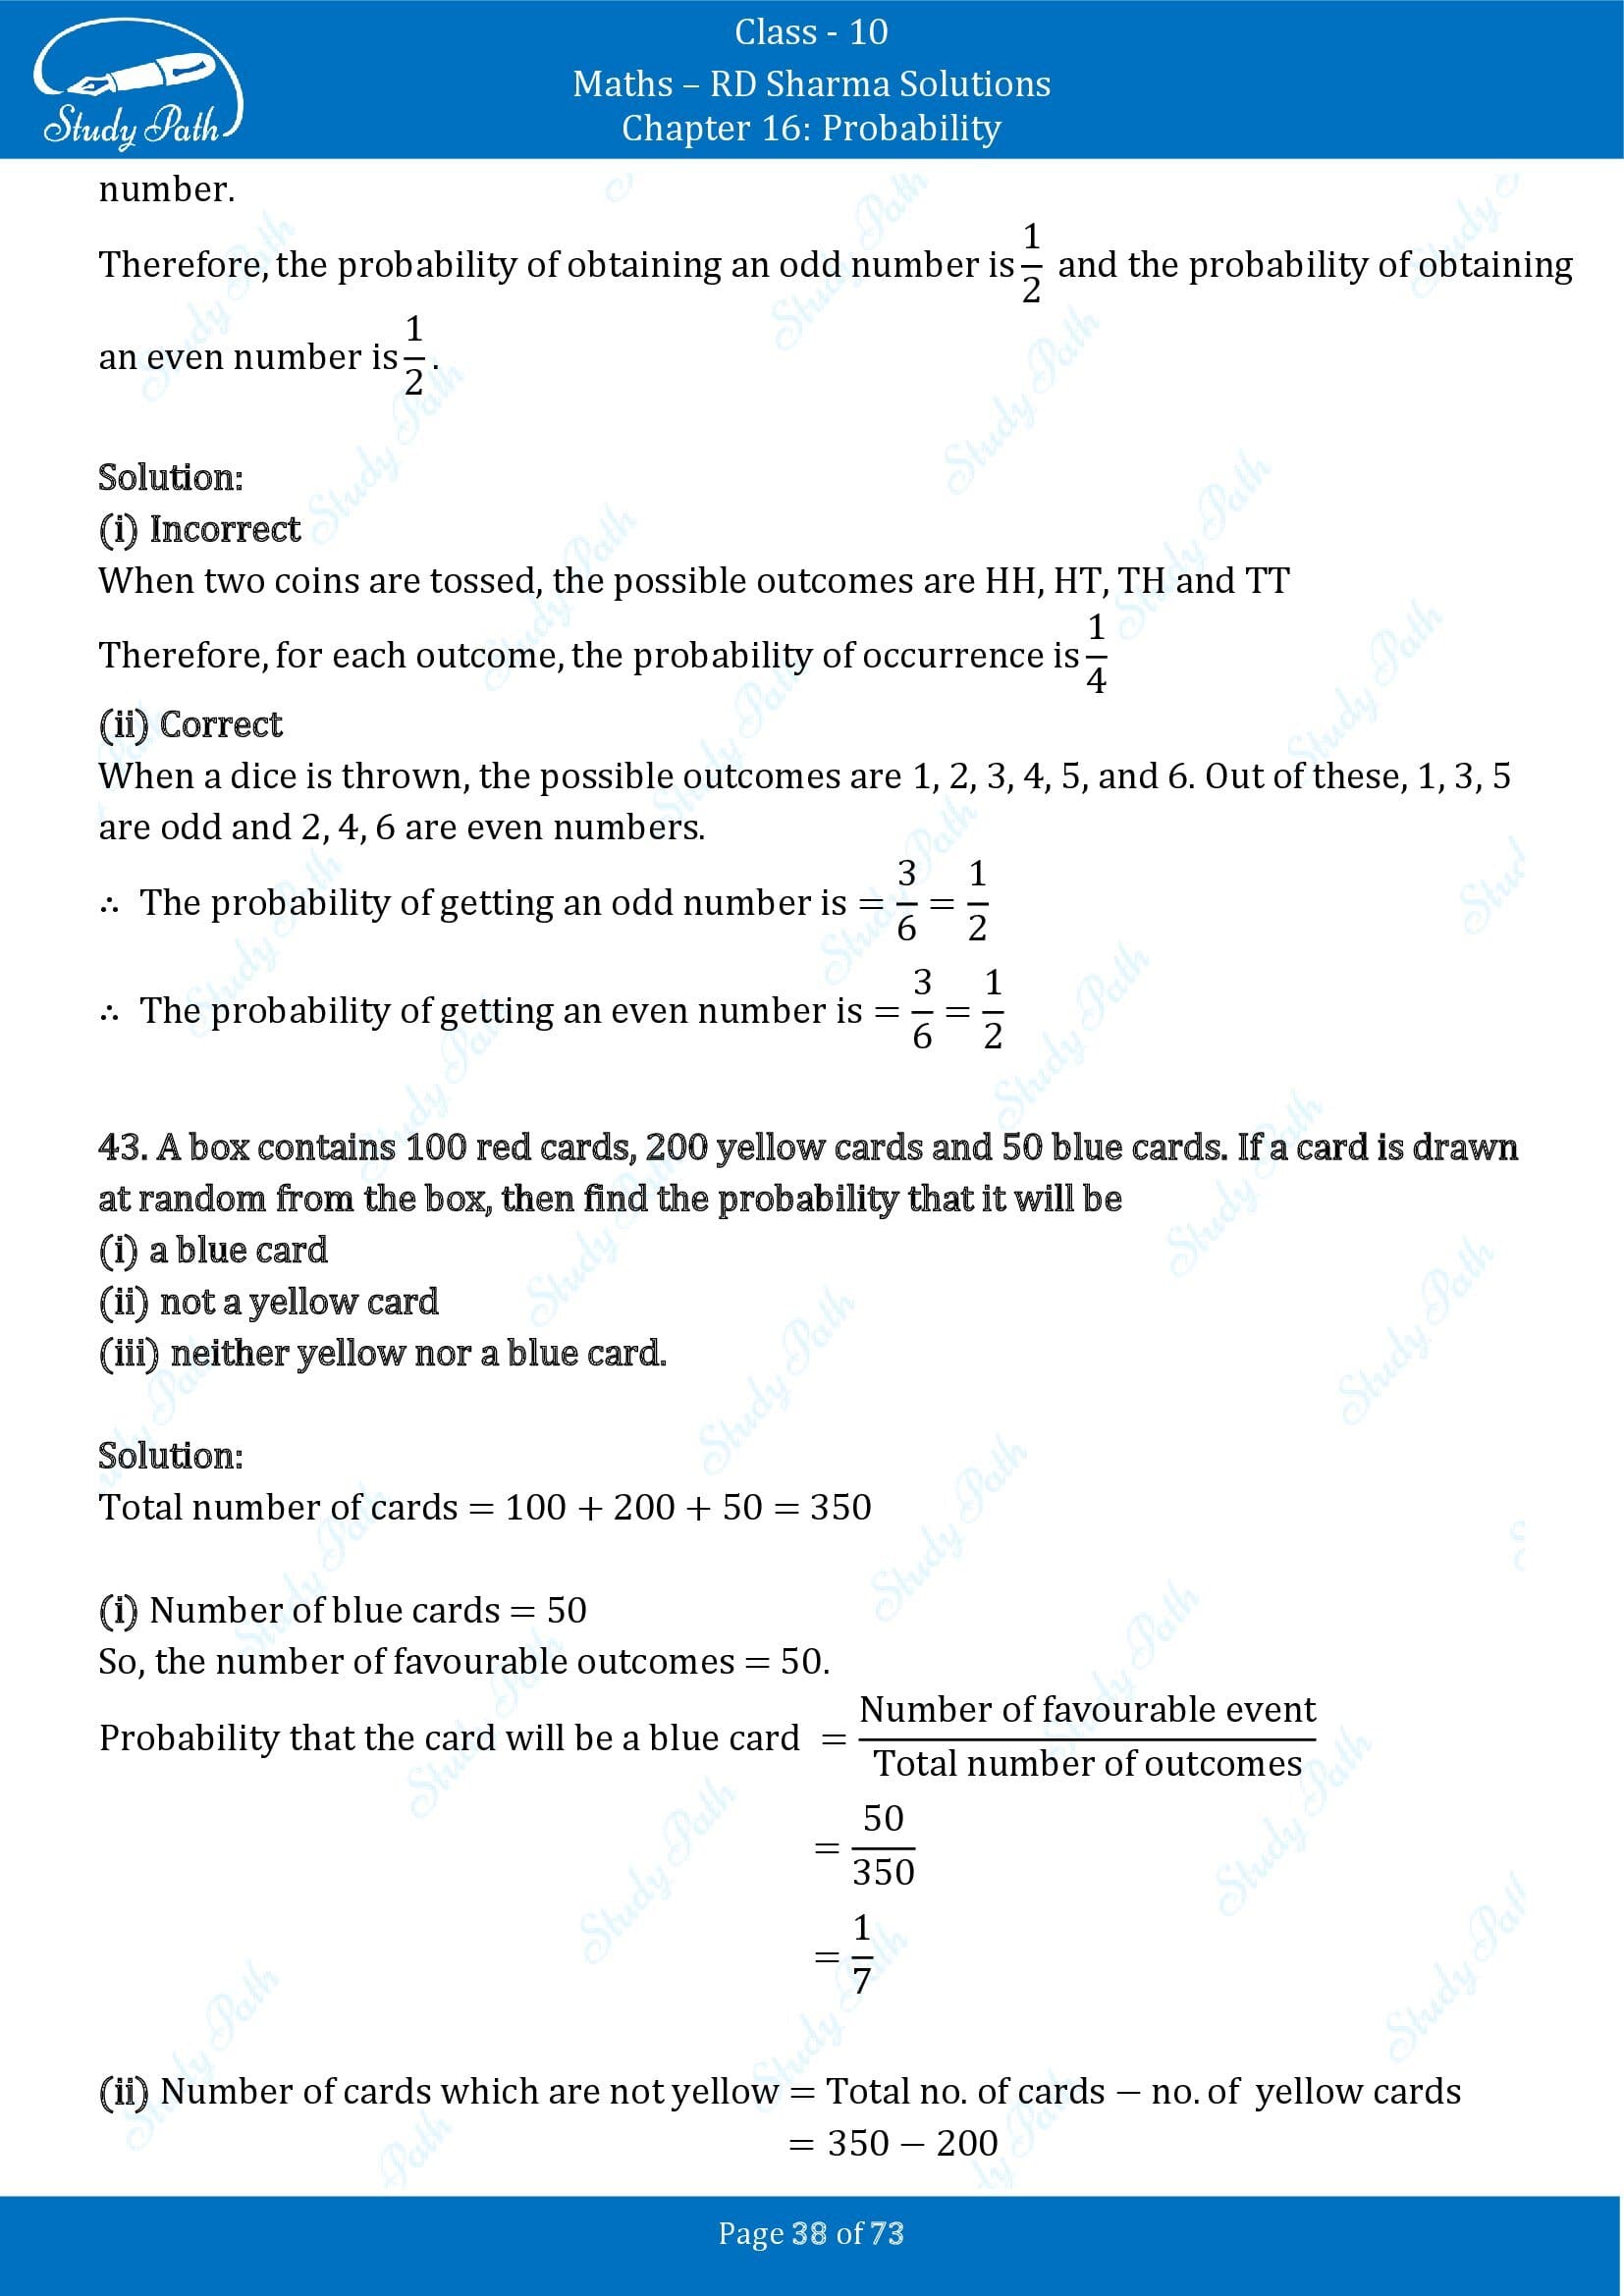 RD Sharma Solutions Class 10 Chapter 16 Probability Exercise 16.1 00038